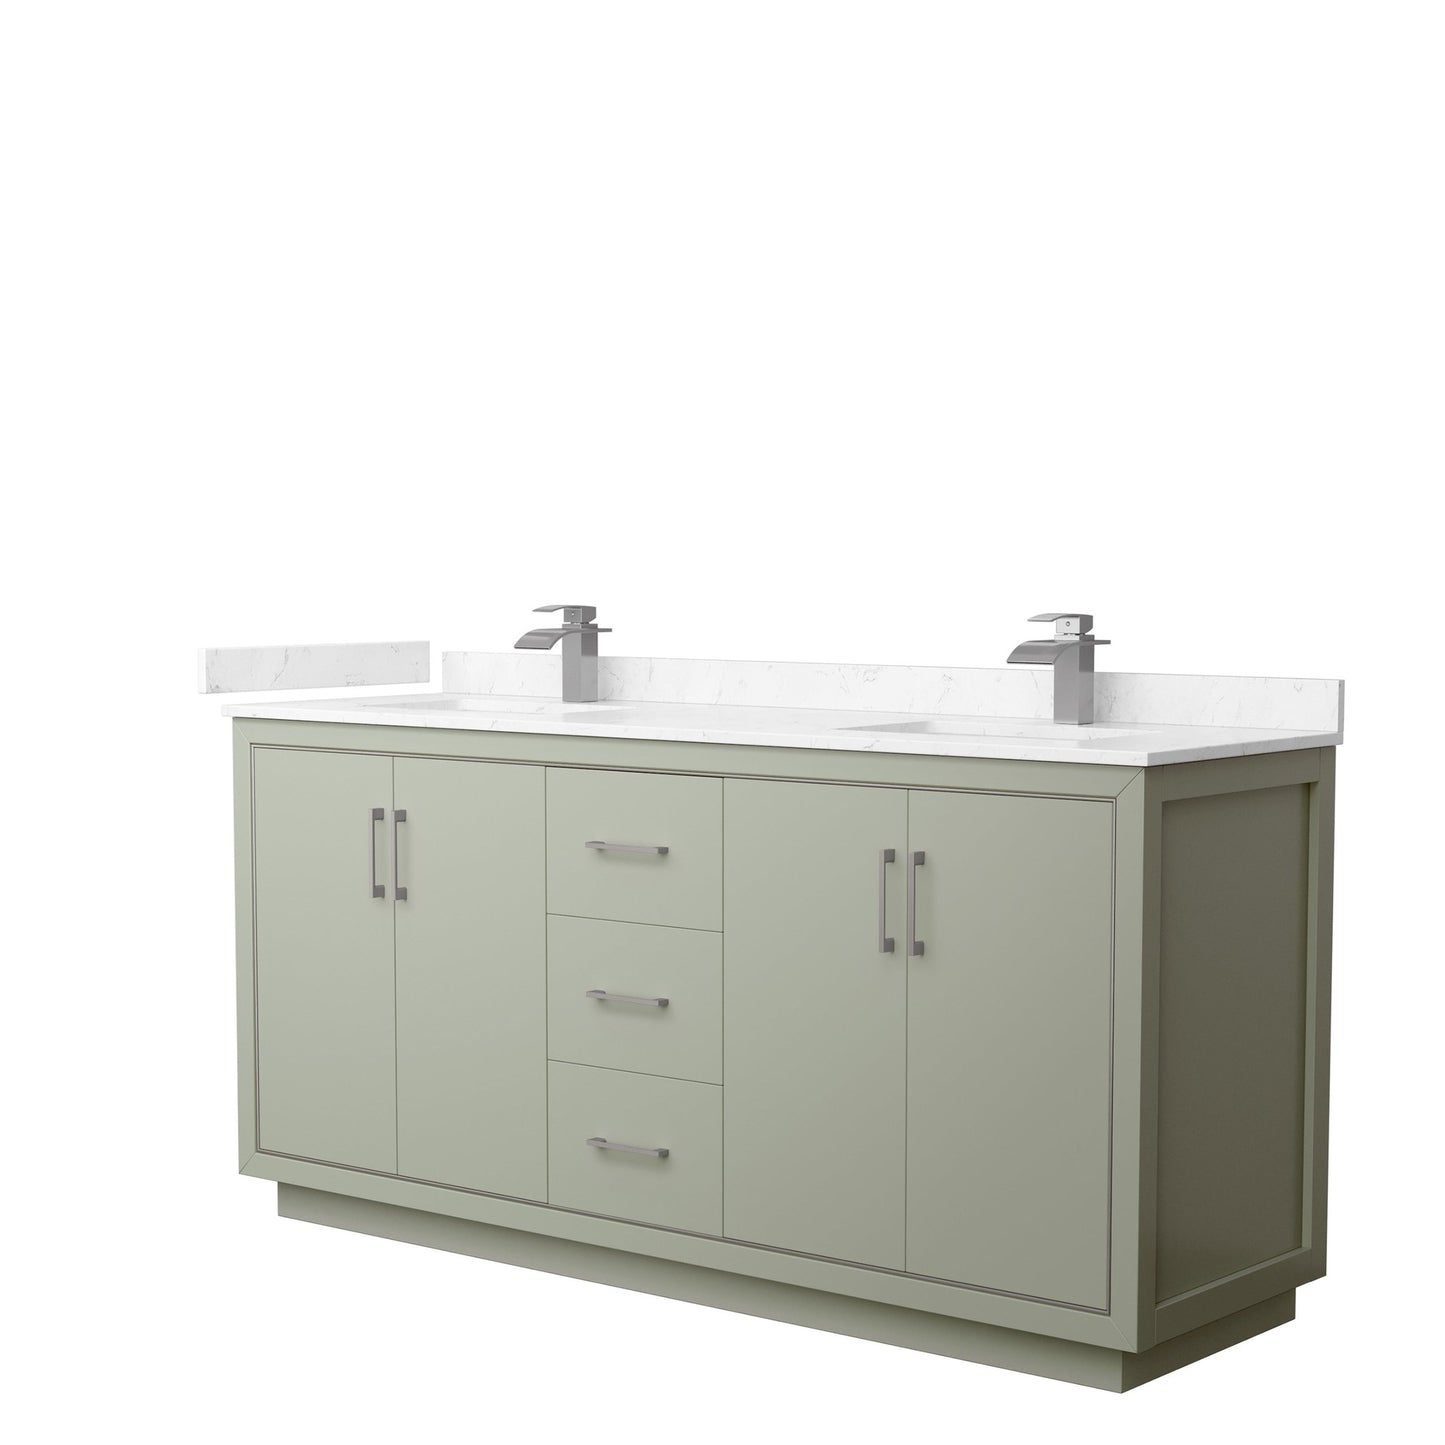 Wyndham Collection Icon 72" Double Bathroom Vanity in Light Green, Carrara Cultured Marble Countertop, Undermount Square Sinks, Brushed Nickel Trim